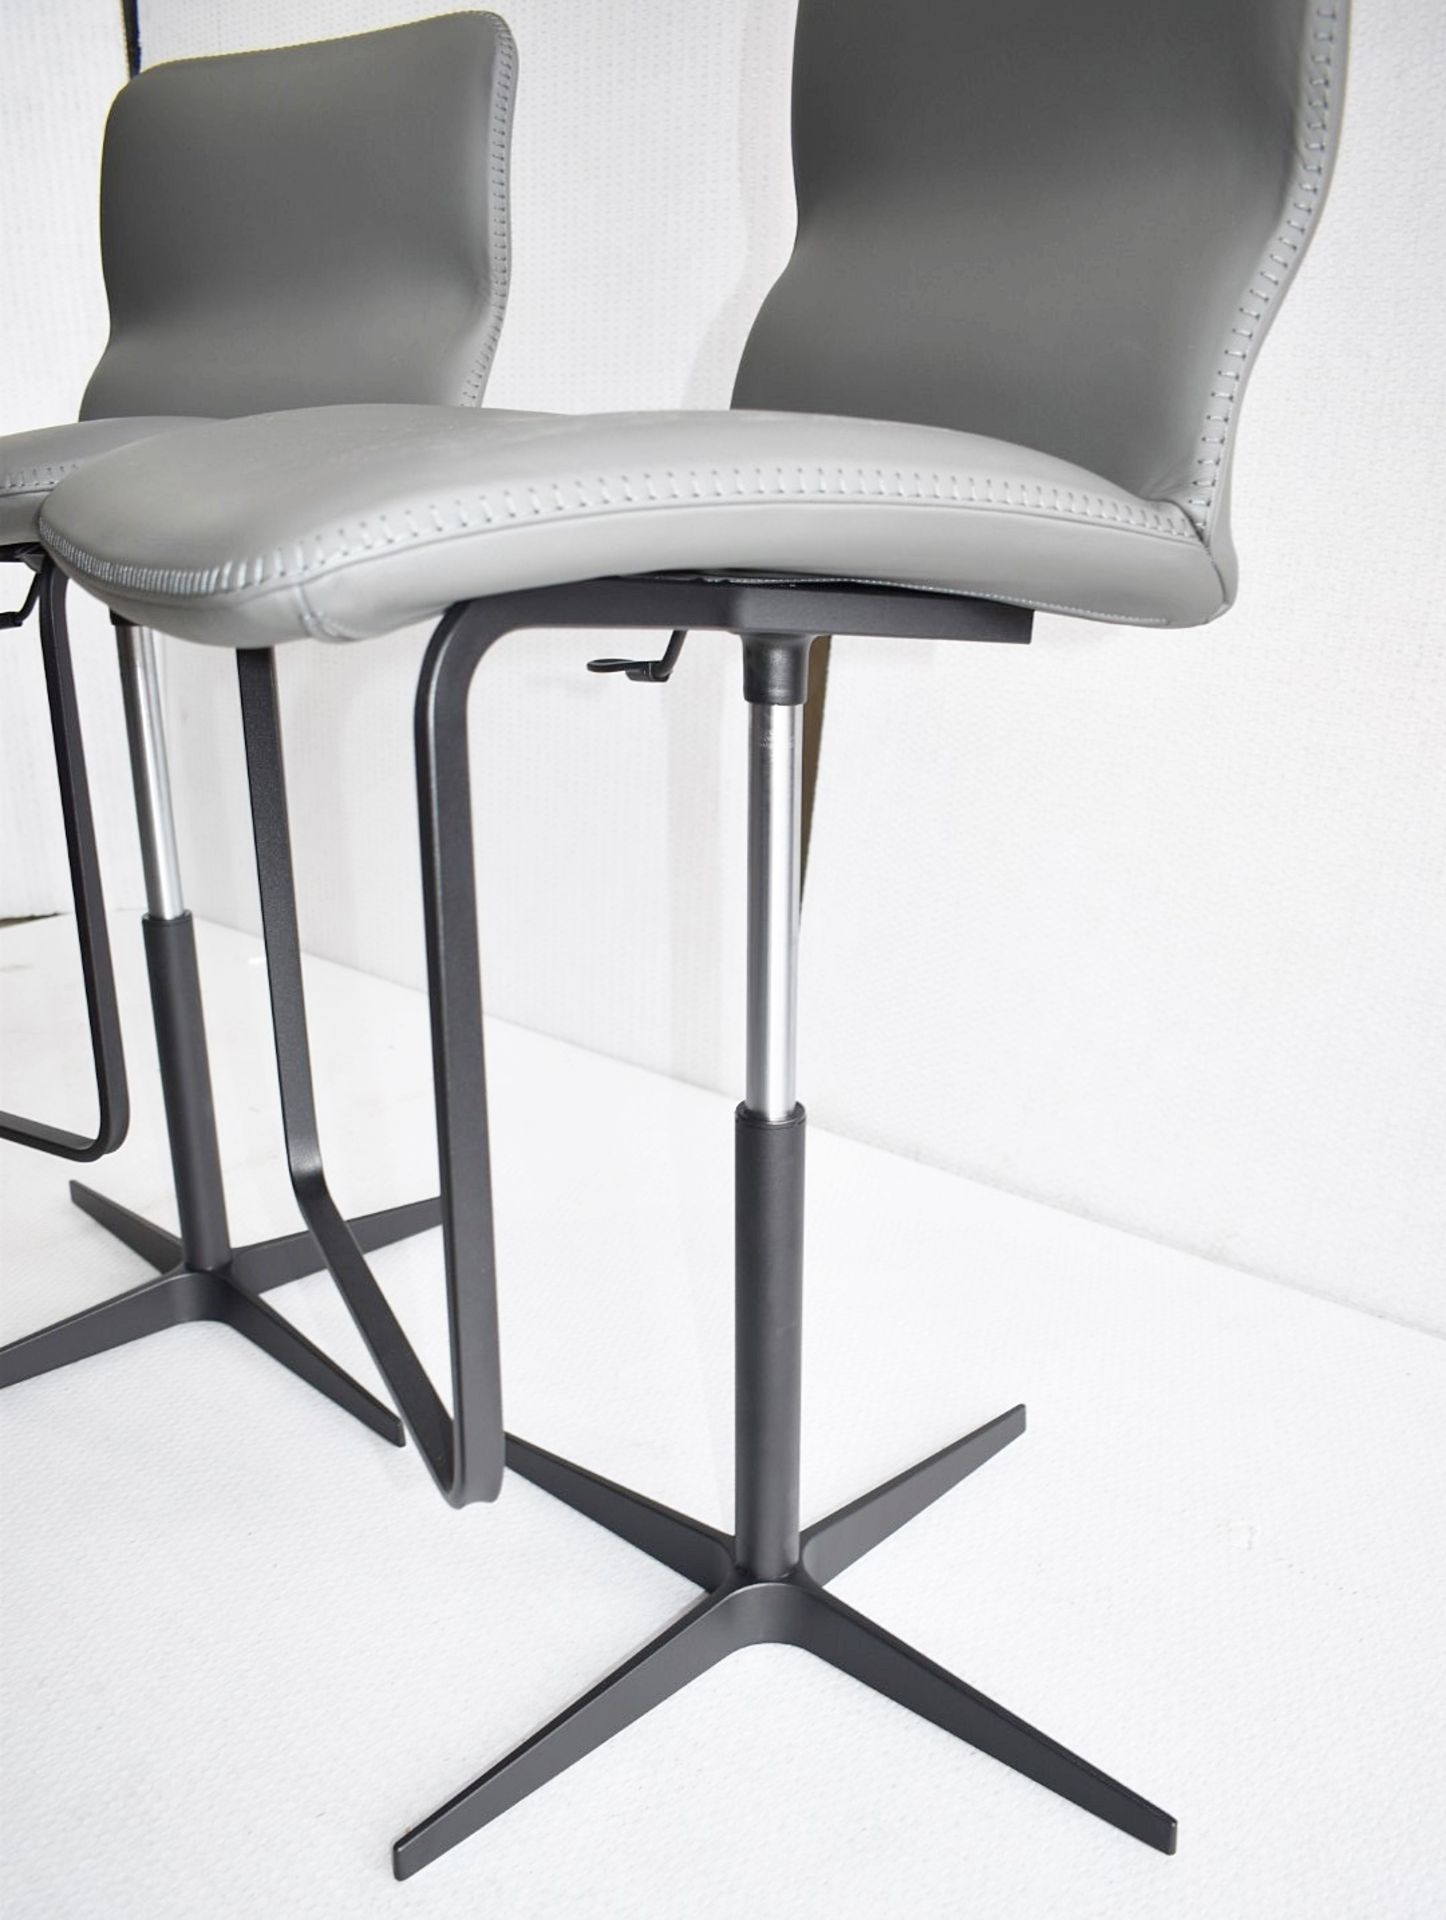 A Pair of CATTELAN ITALIA 'Victor X' Designer Leather Upholstered Barstools - Original Price £1,798 - Image 7 of 12